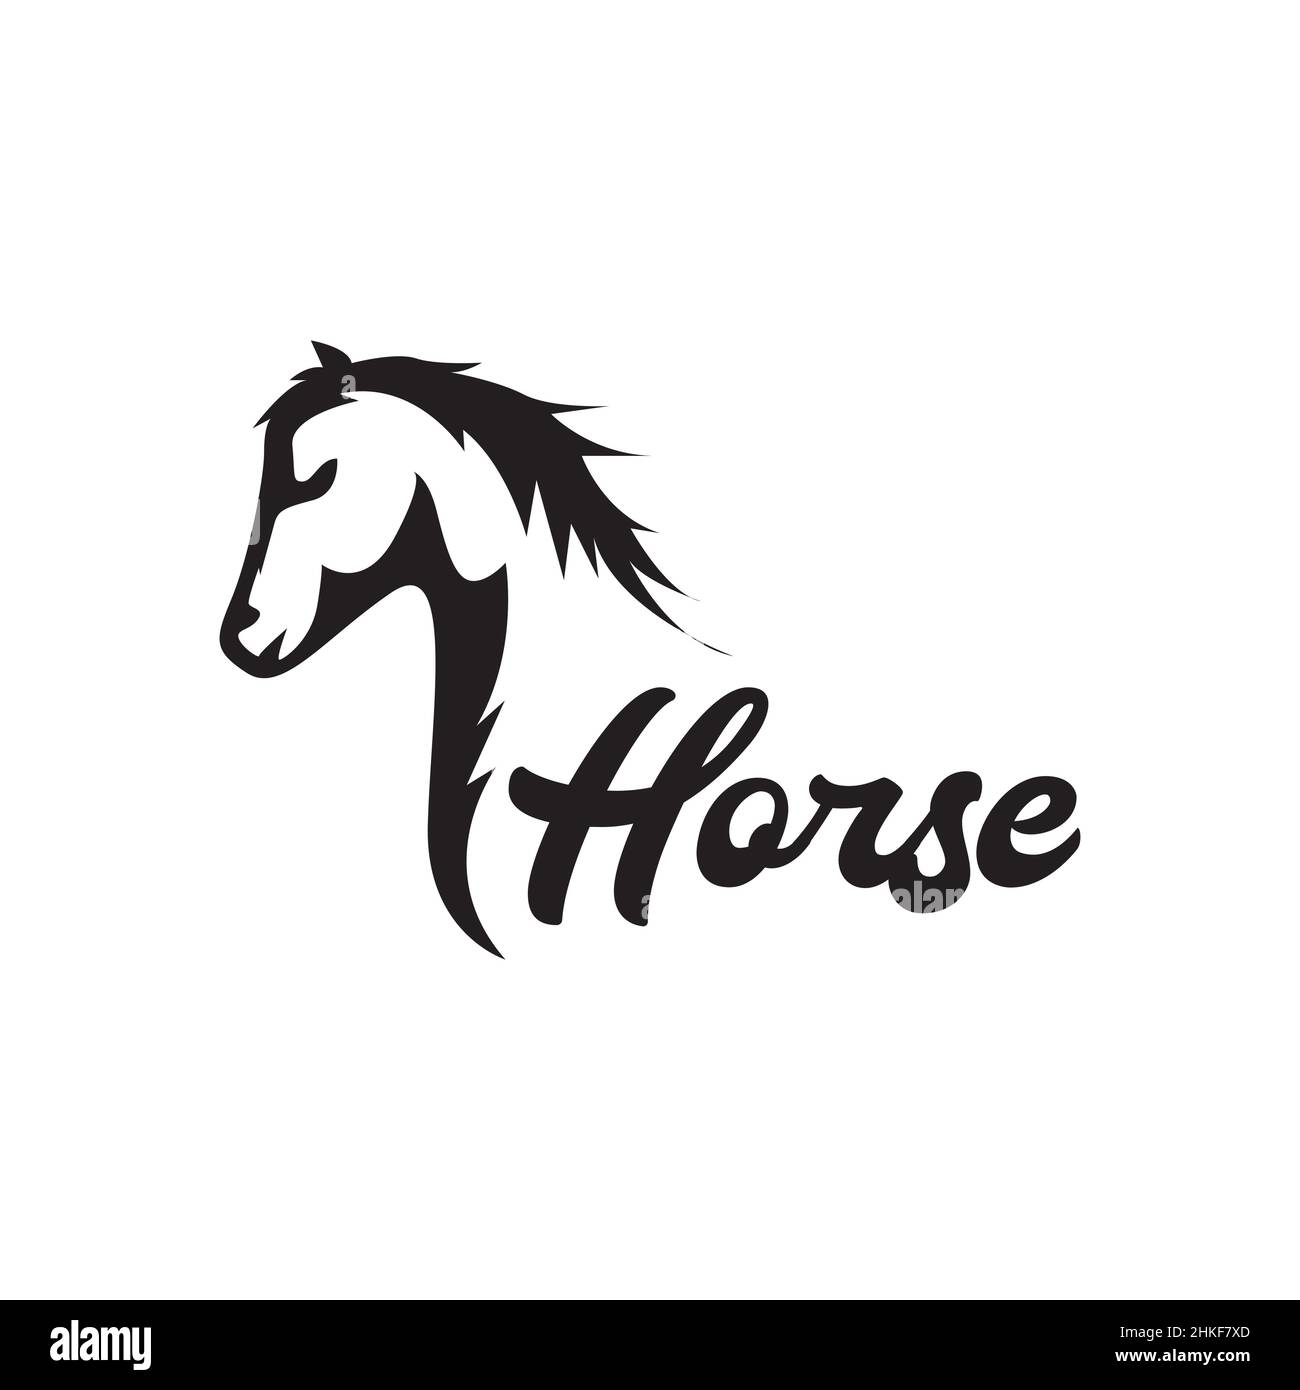 side view isolated head horse logo design, vector graphic symbol icon ...